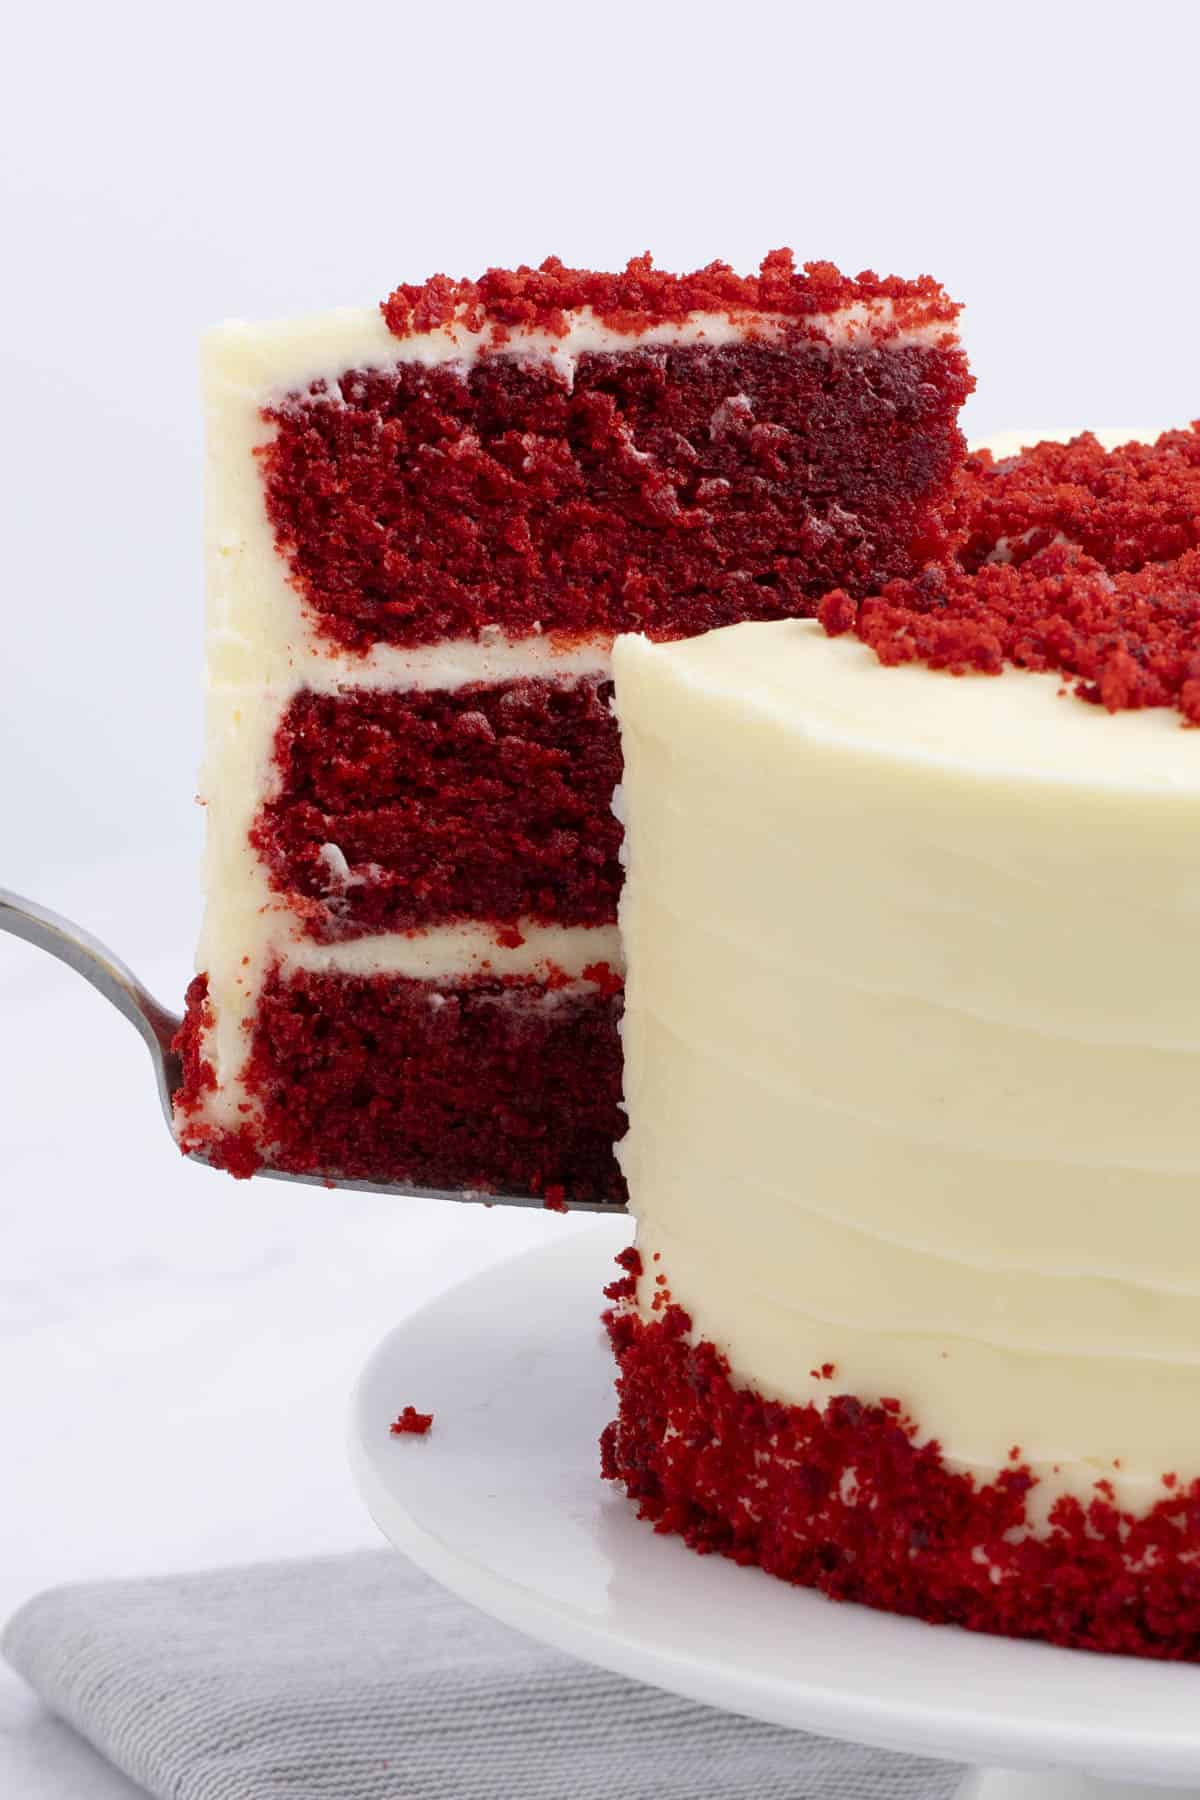 the side view of a slice of red velvet cake being lifted out of the whole cake with a serving knife